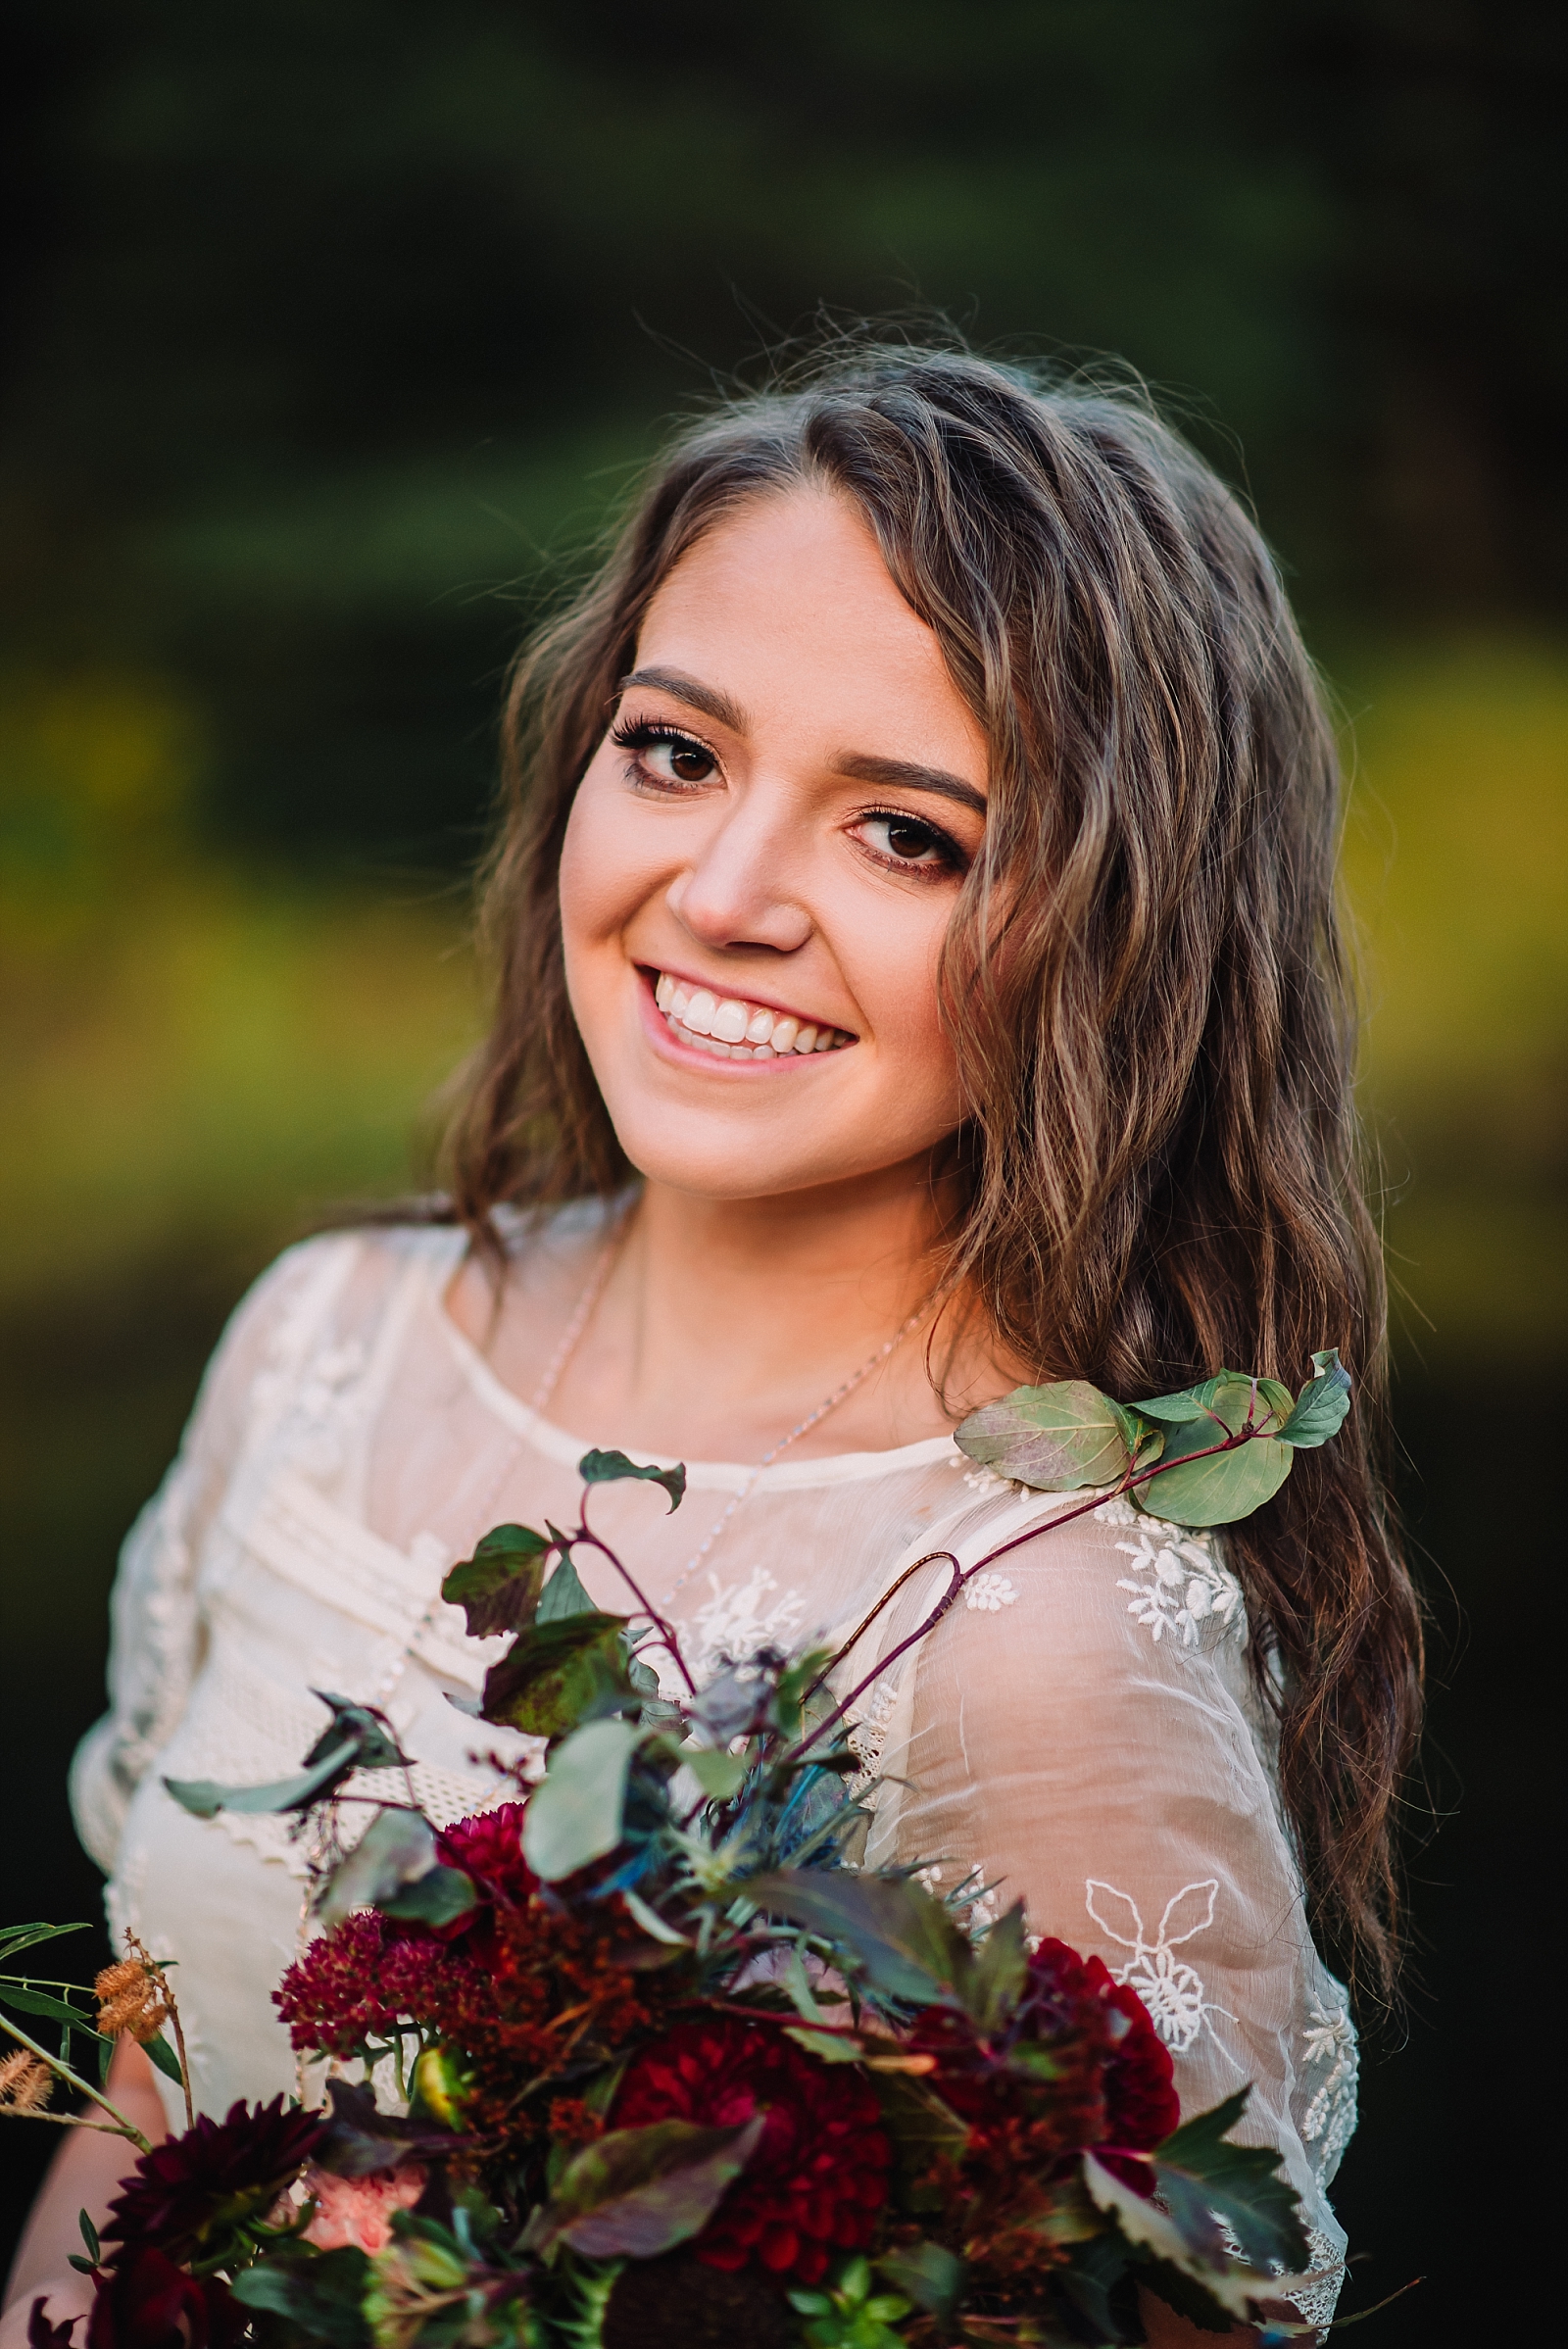 bride smiling at the camera while holding a burgundy bridal bouquet wearing a lace dress